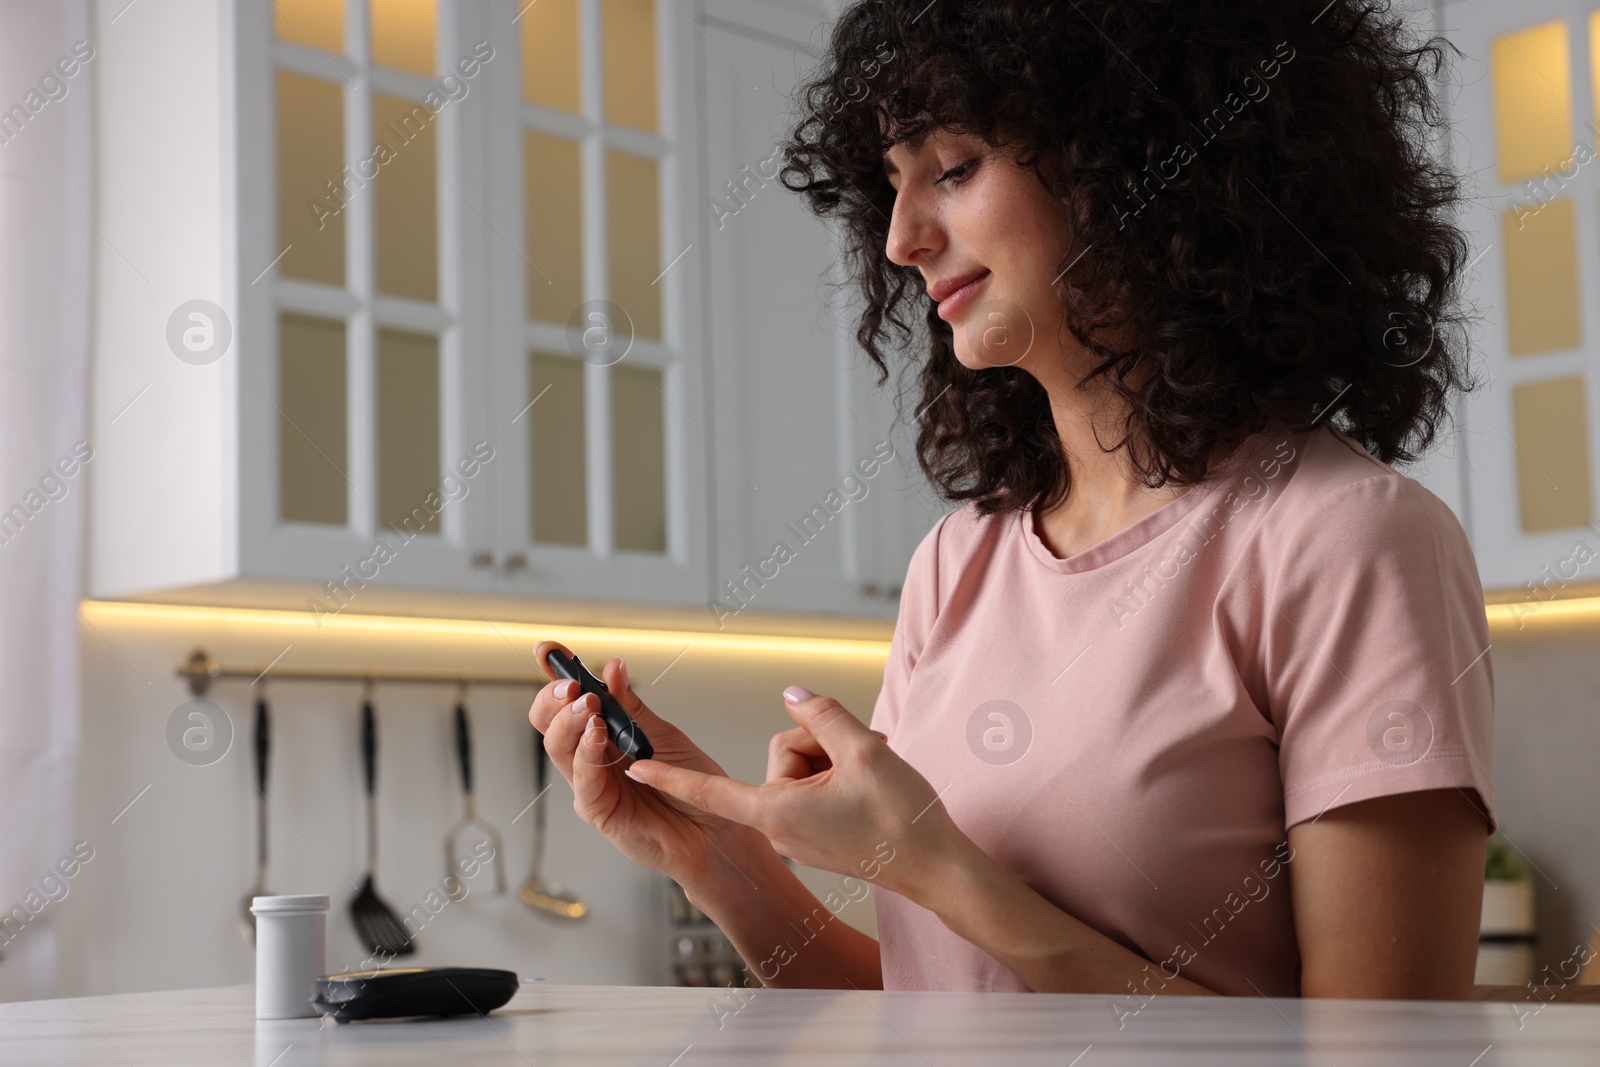 Photo of Diabetes. Woman using lancet pen at table in kitchen